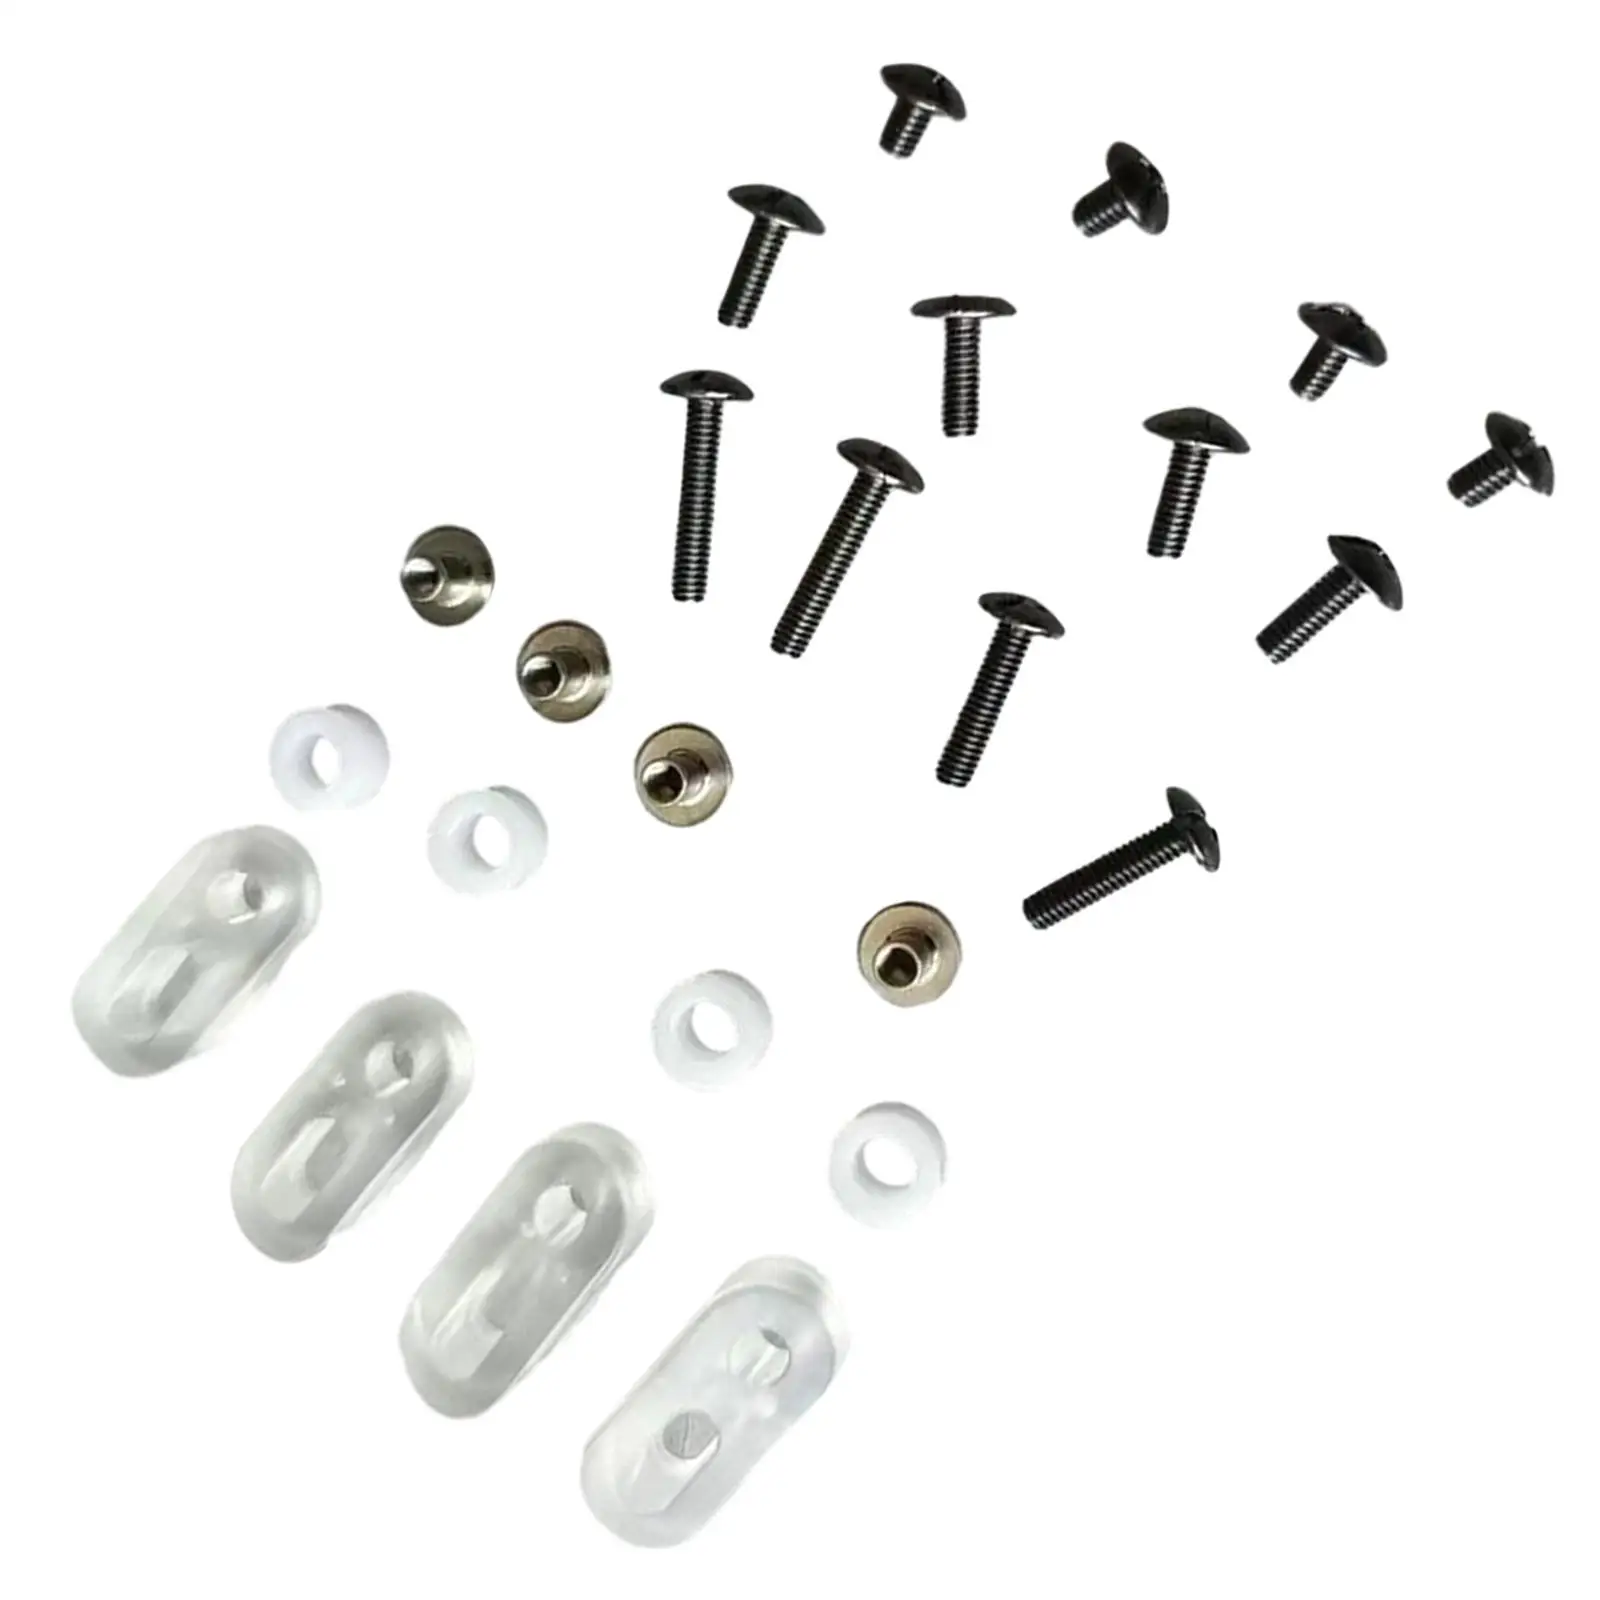 Ice Hockey Visor Hardware Kit Screw Fixings Washers Nuts Maintenance High Quality Safety Accessories Spare Hardware Kit